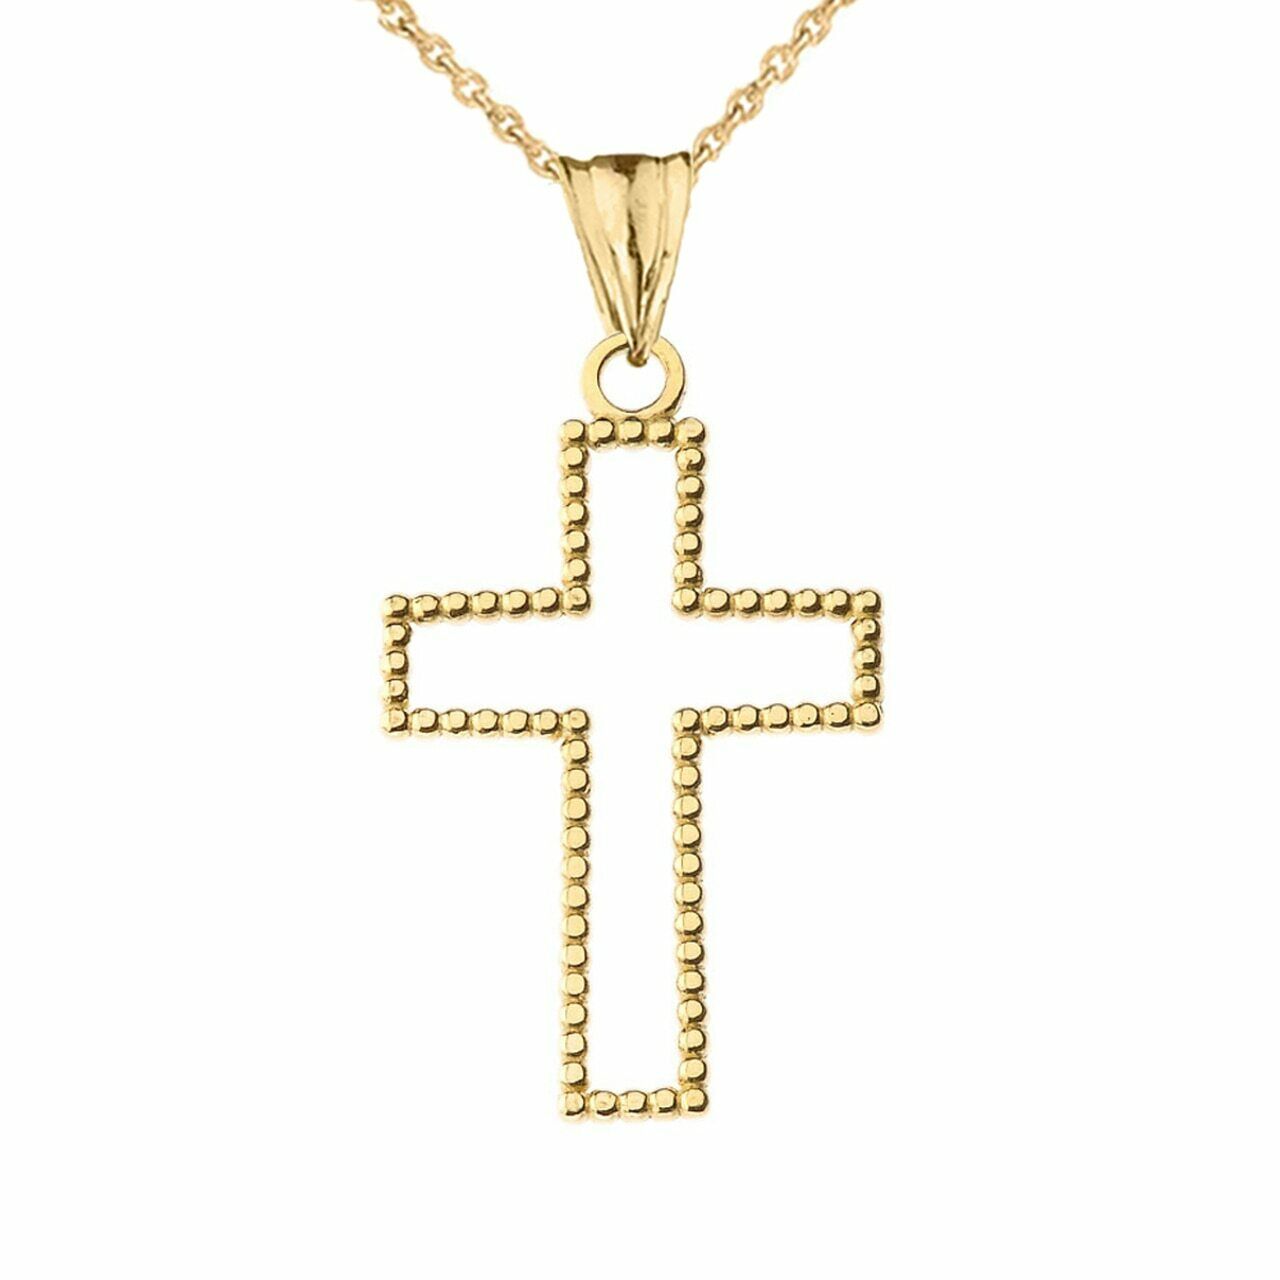 10k or 14k Solid Gold Two Sided Beaded Open Cross 1.5" Pendant Necklace